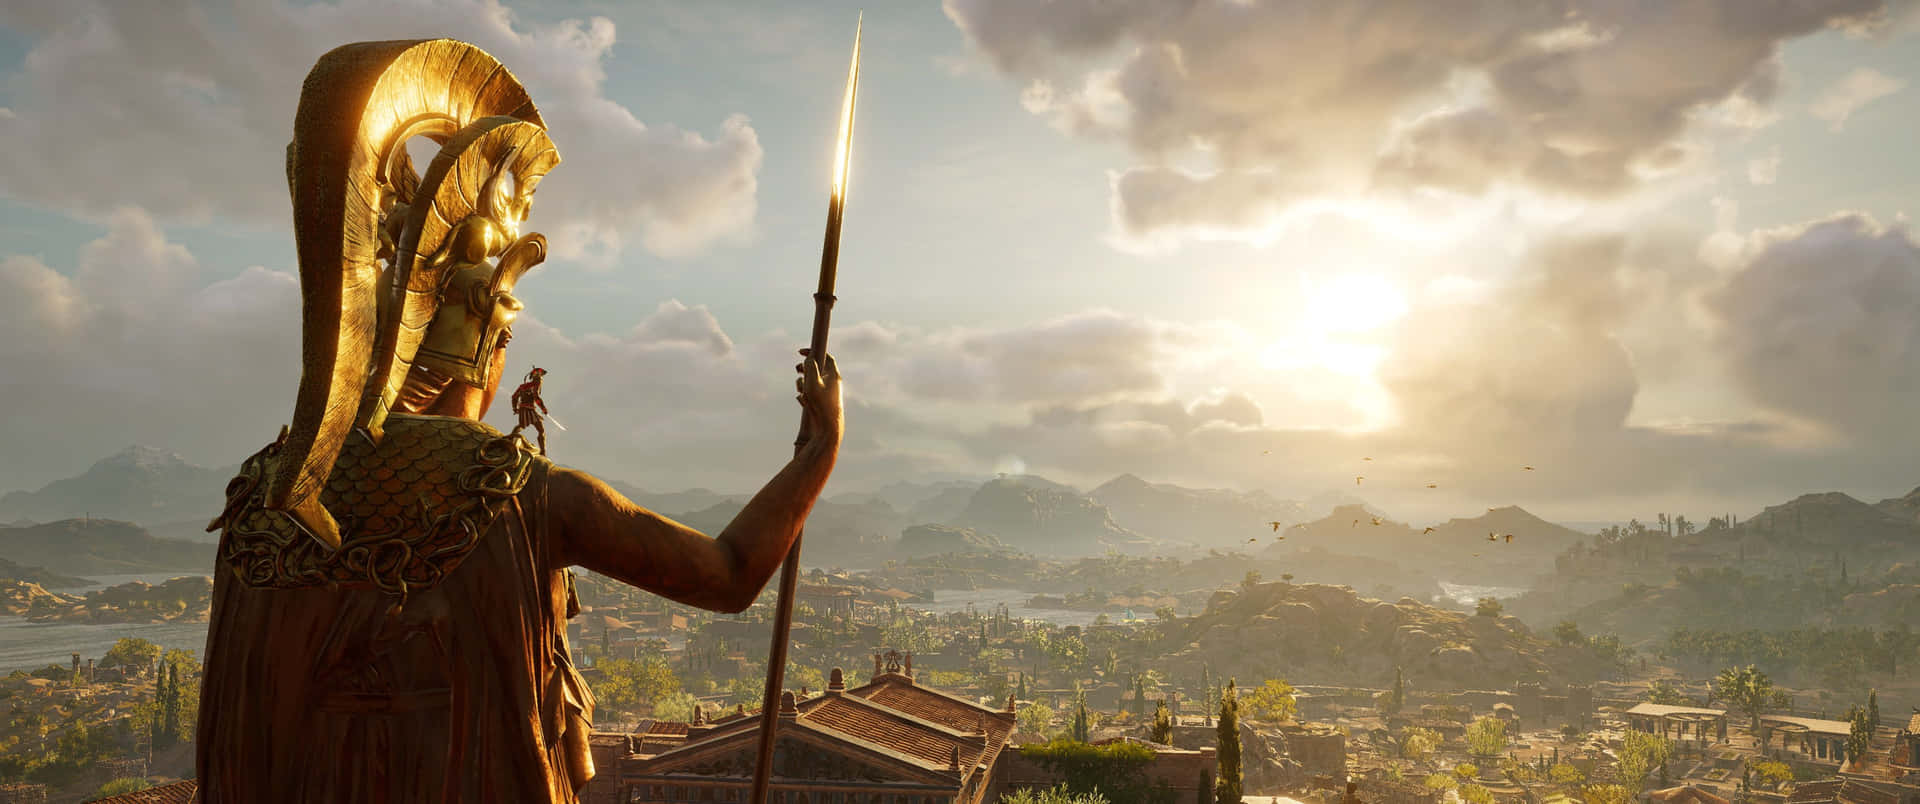 3440x1440p Assassin's Creed Odyssey Background Assassin Standing On Statue's Shoulder Background